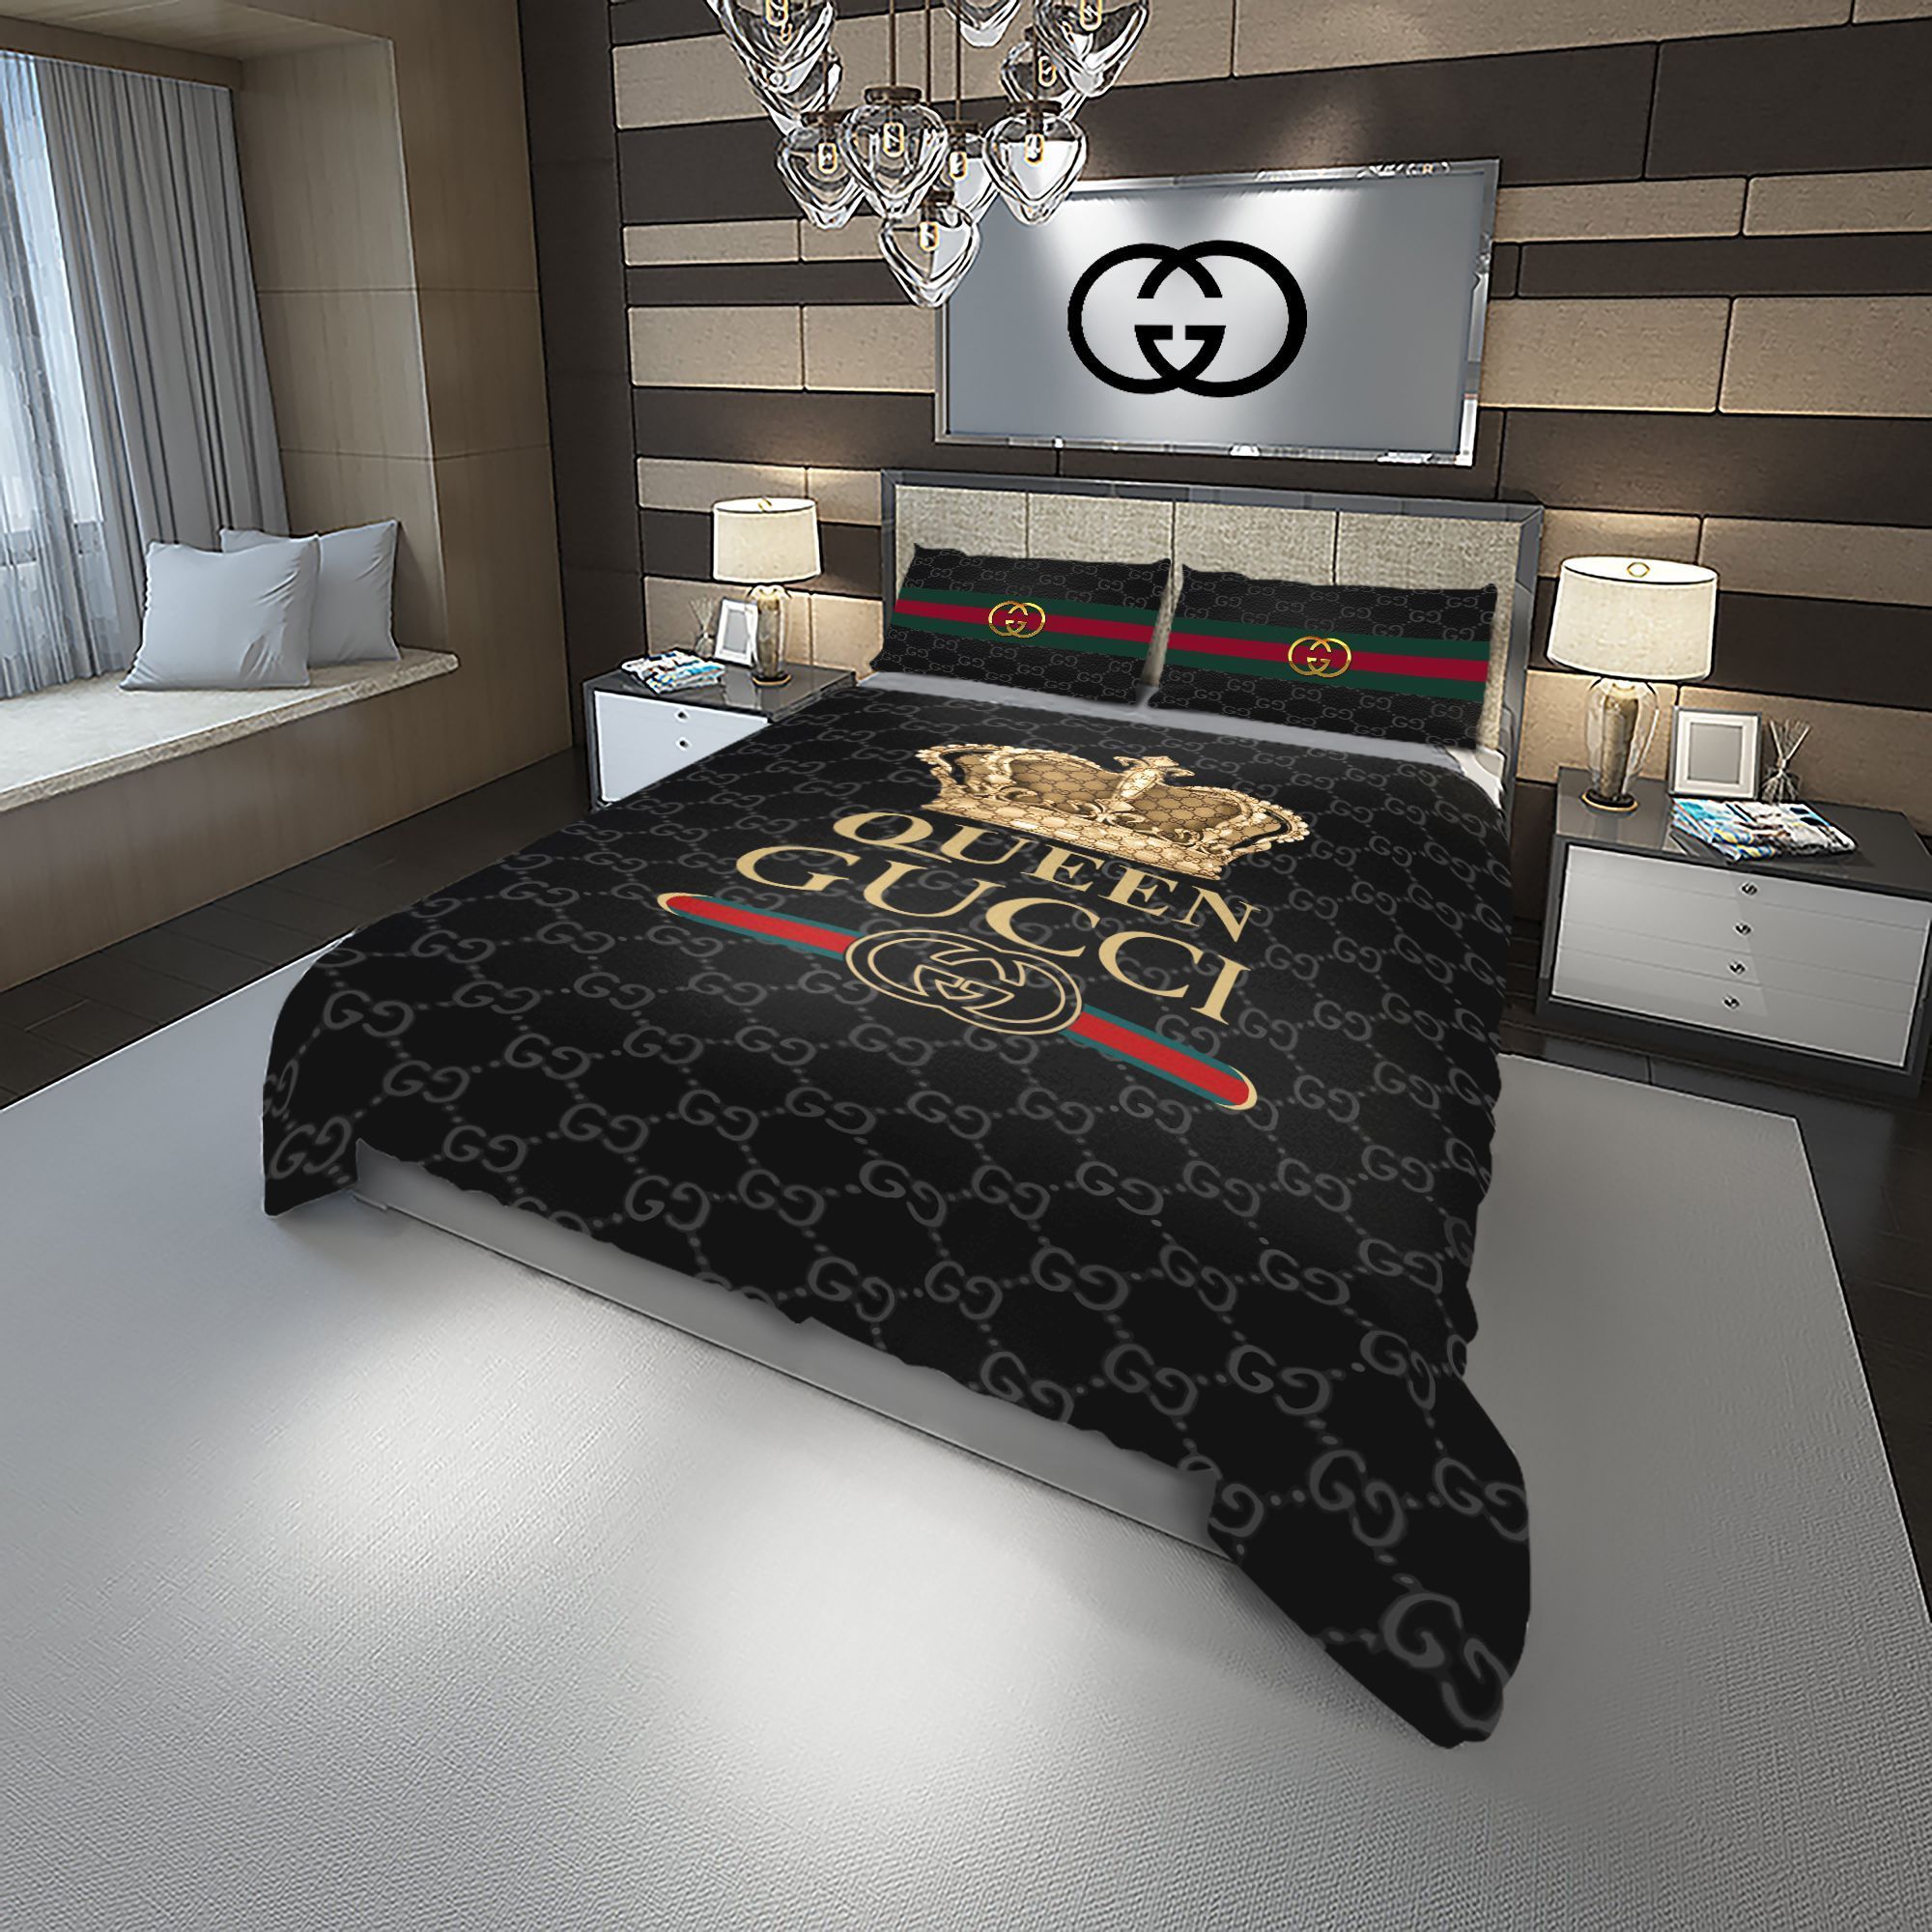 Let me show you about some luxury brand bedding set 2022 99